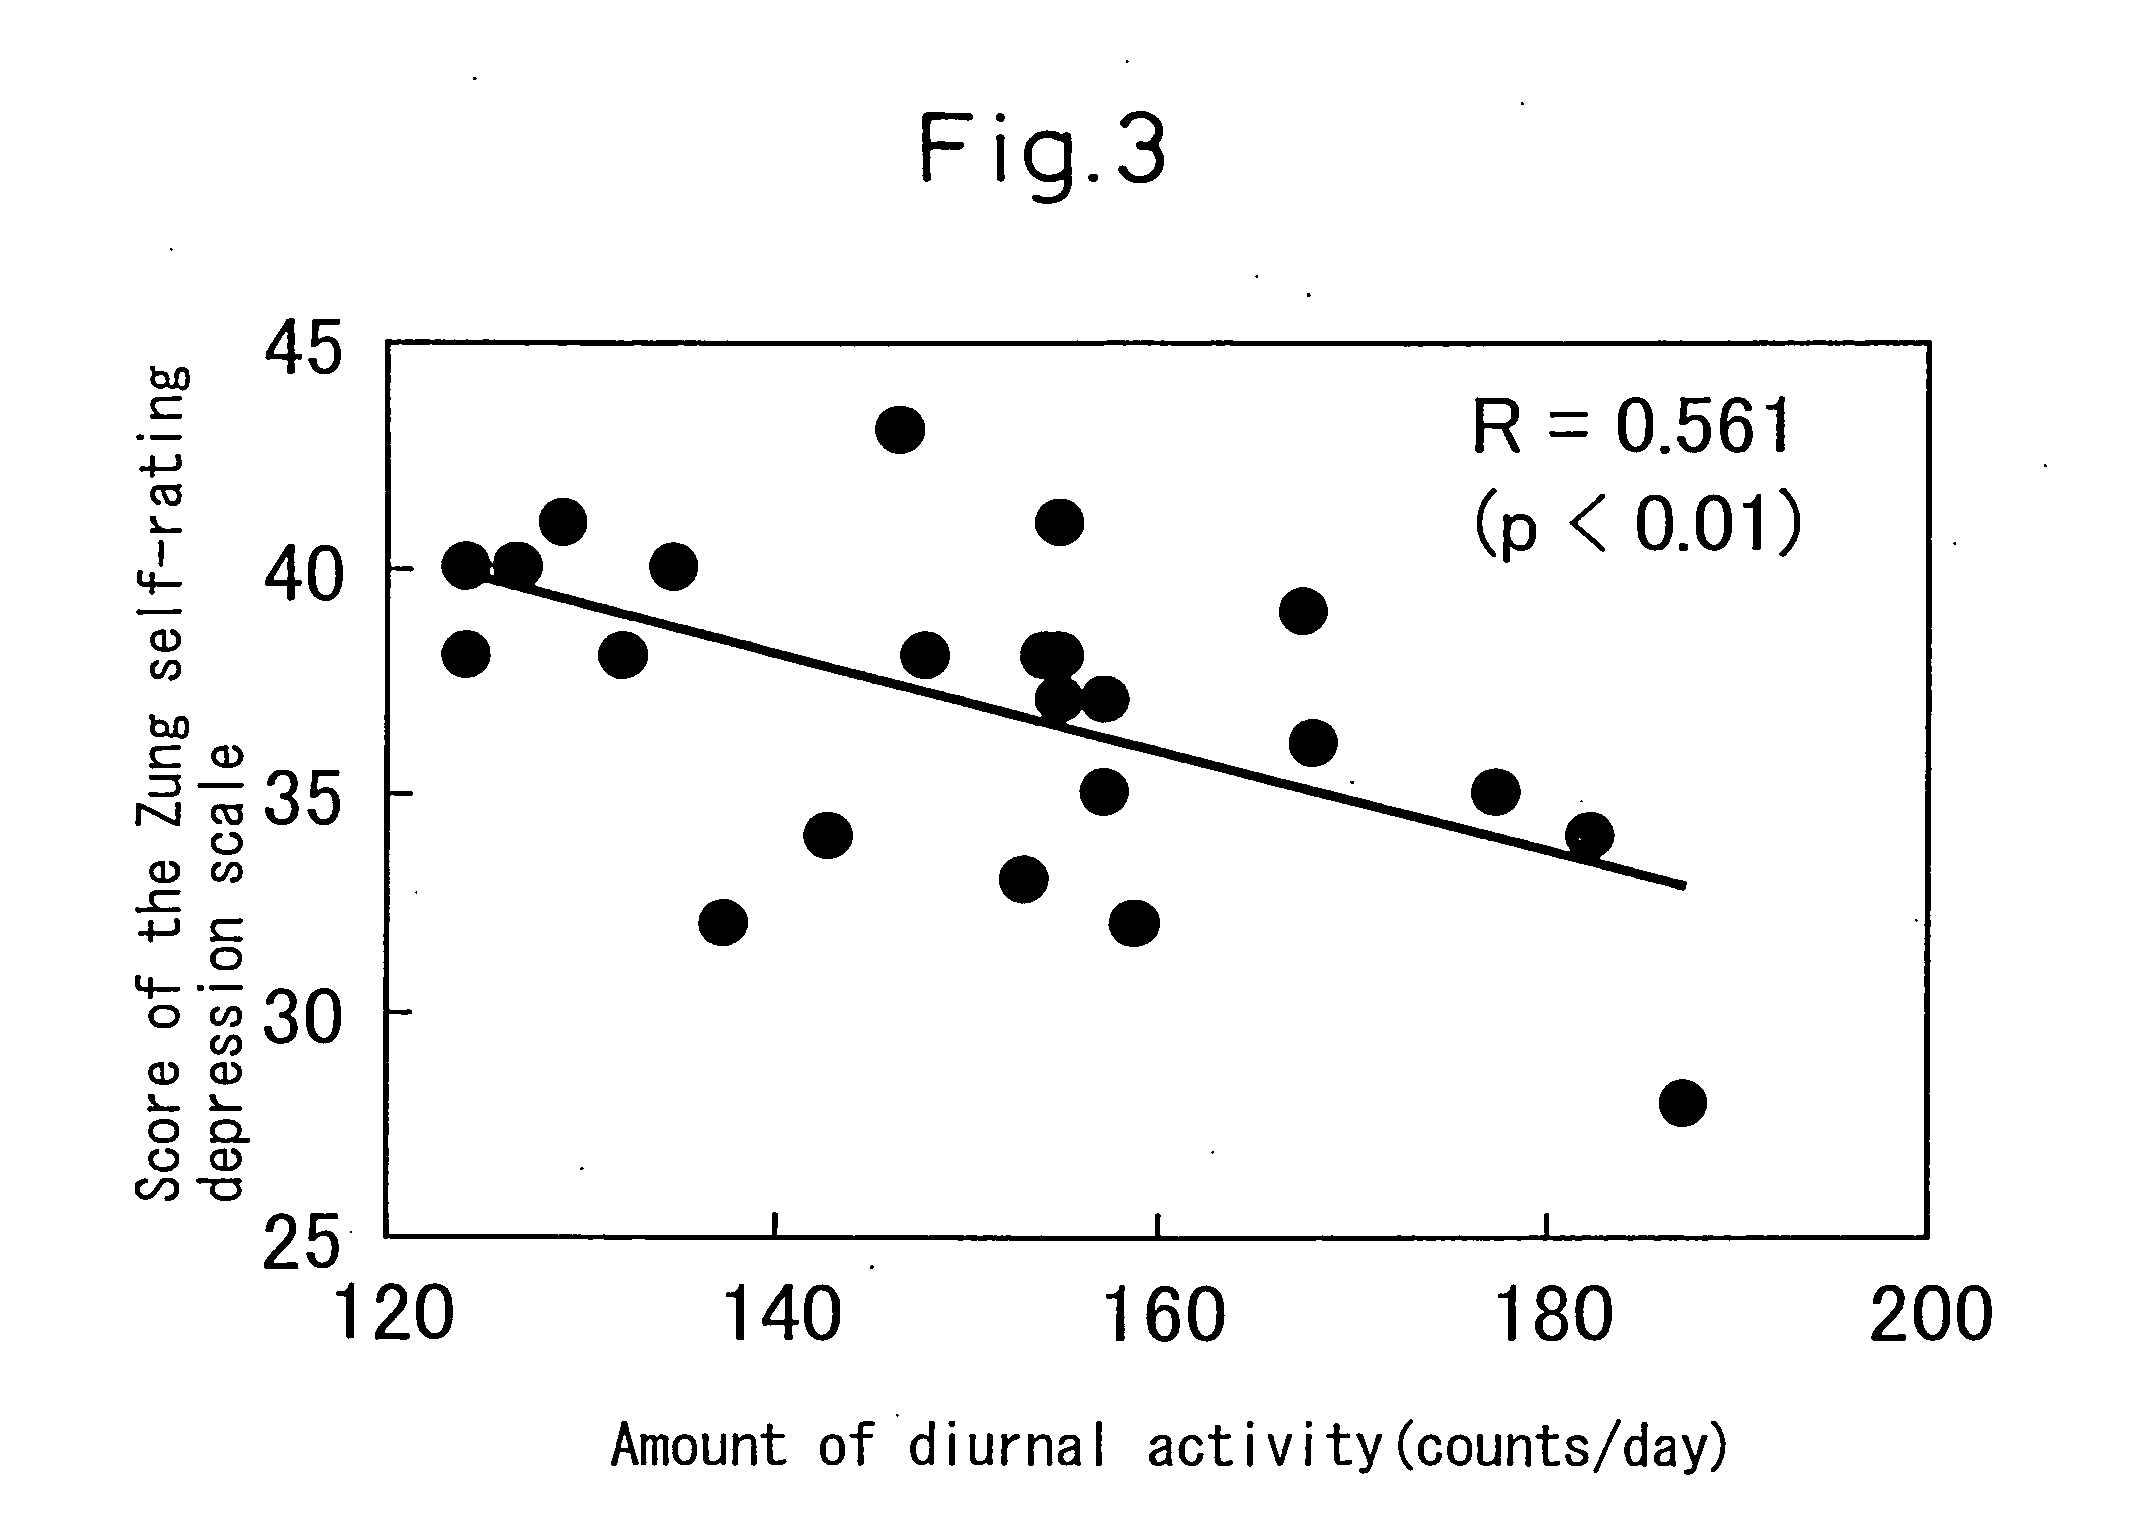 Compositions Ameliorating a Reduced Diurnal Activity and/or Depressive Symptoms